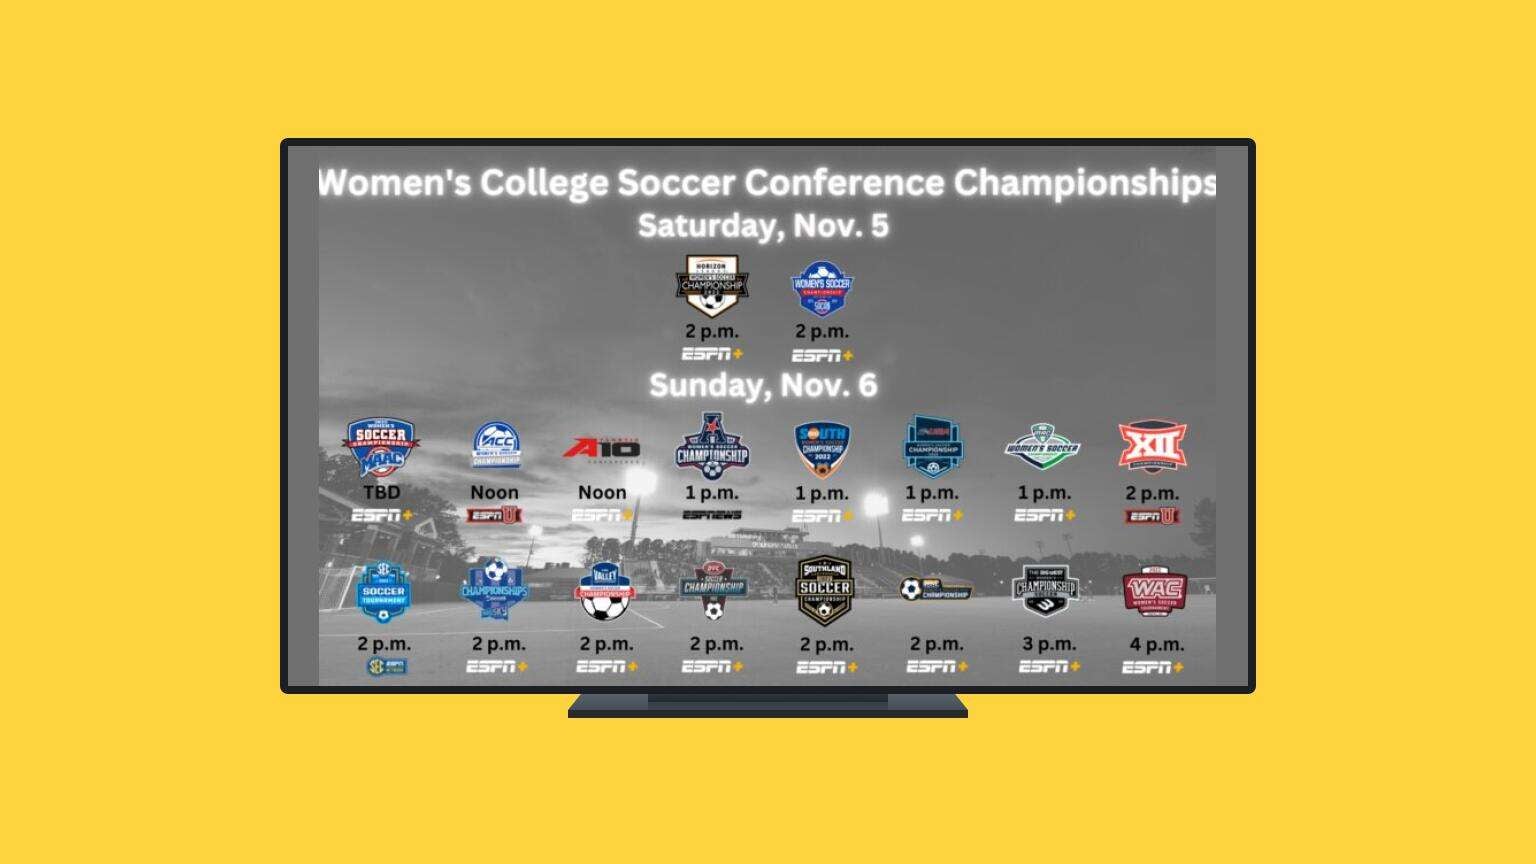 How to Watch 2022 Women's College Soccer Conference Championships Live